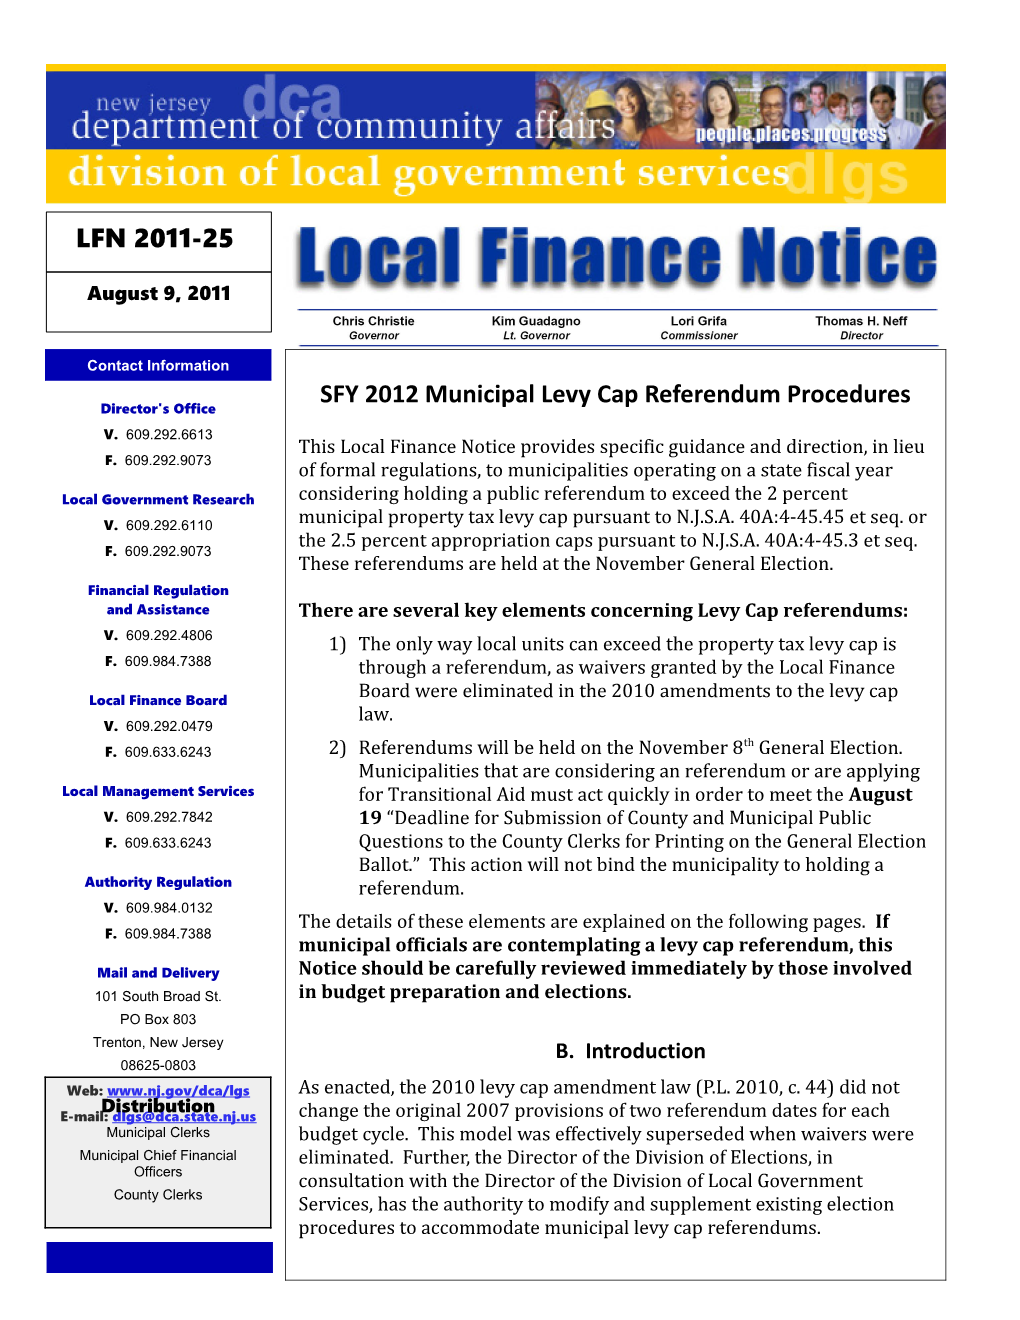 Local Finance Notice 2011-25August 9, 2011Page 1